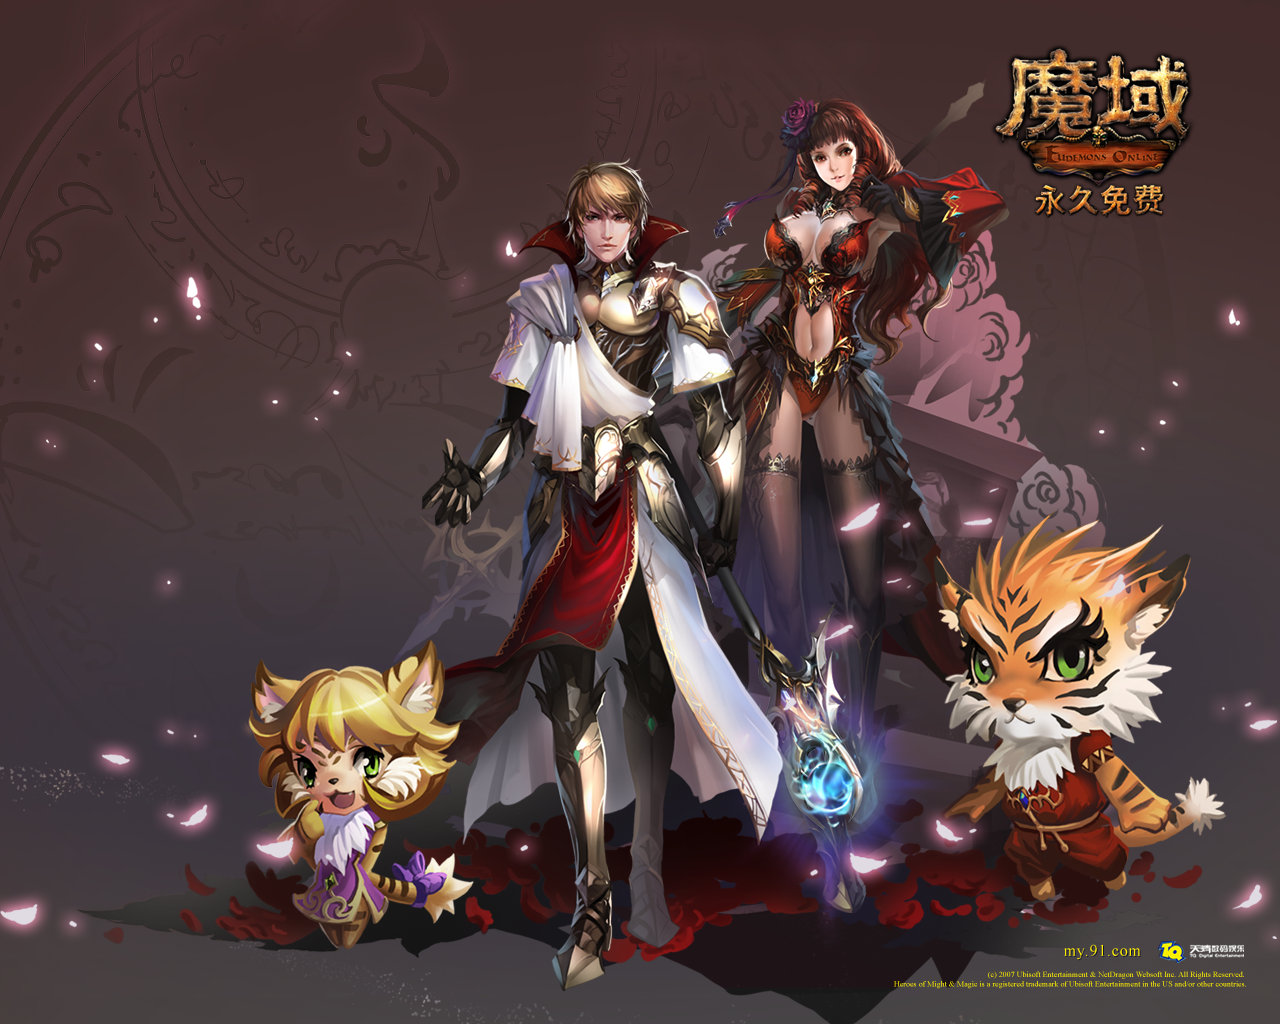 Video Game Eudemons Online 1280x1024